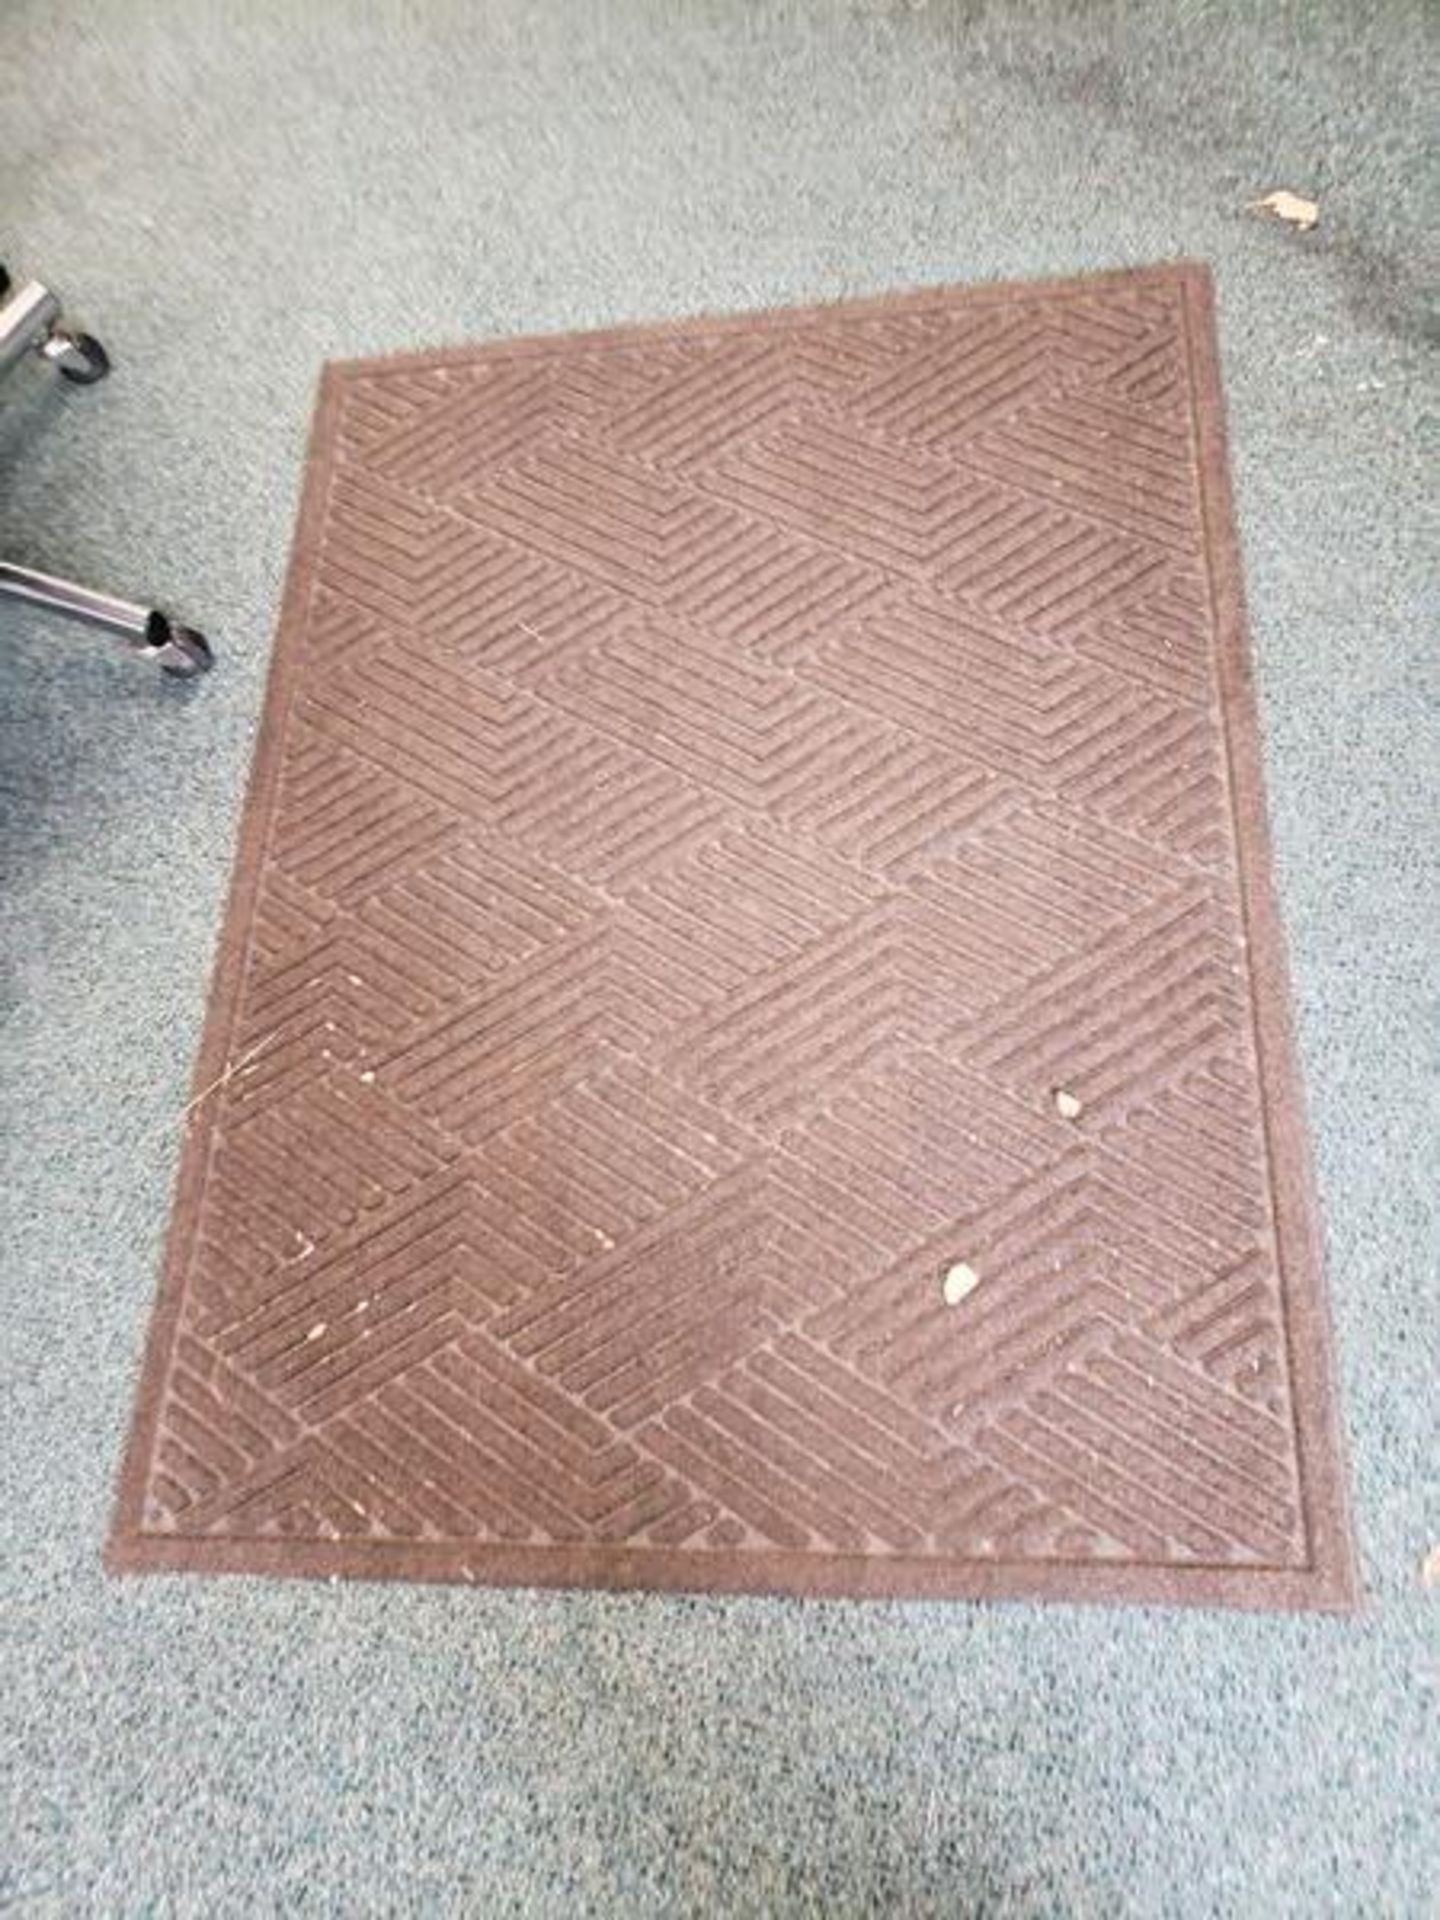 RUG AND CHAIR MAT - Image 2 of 3